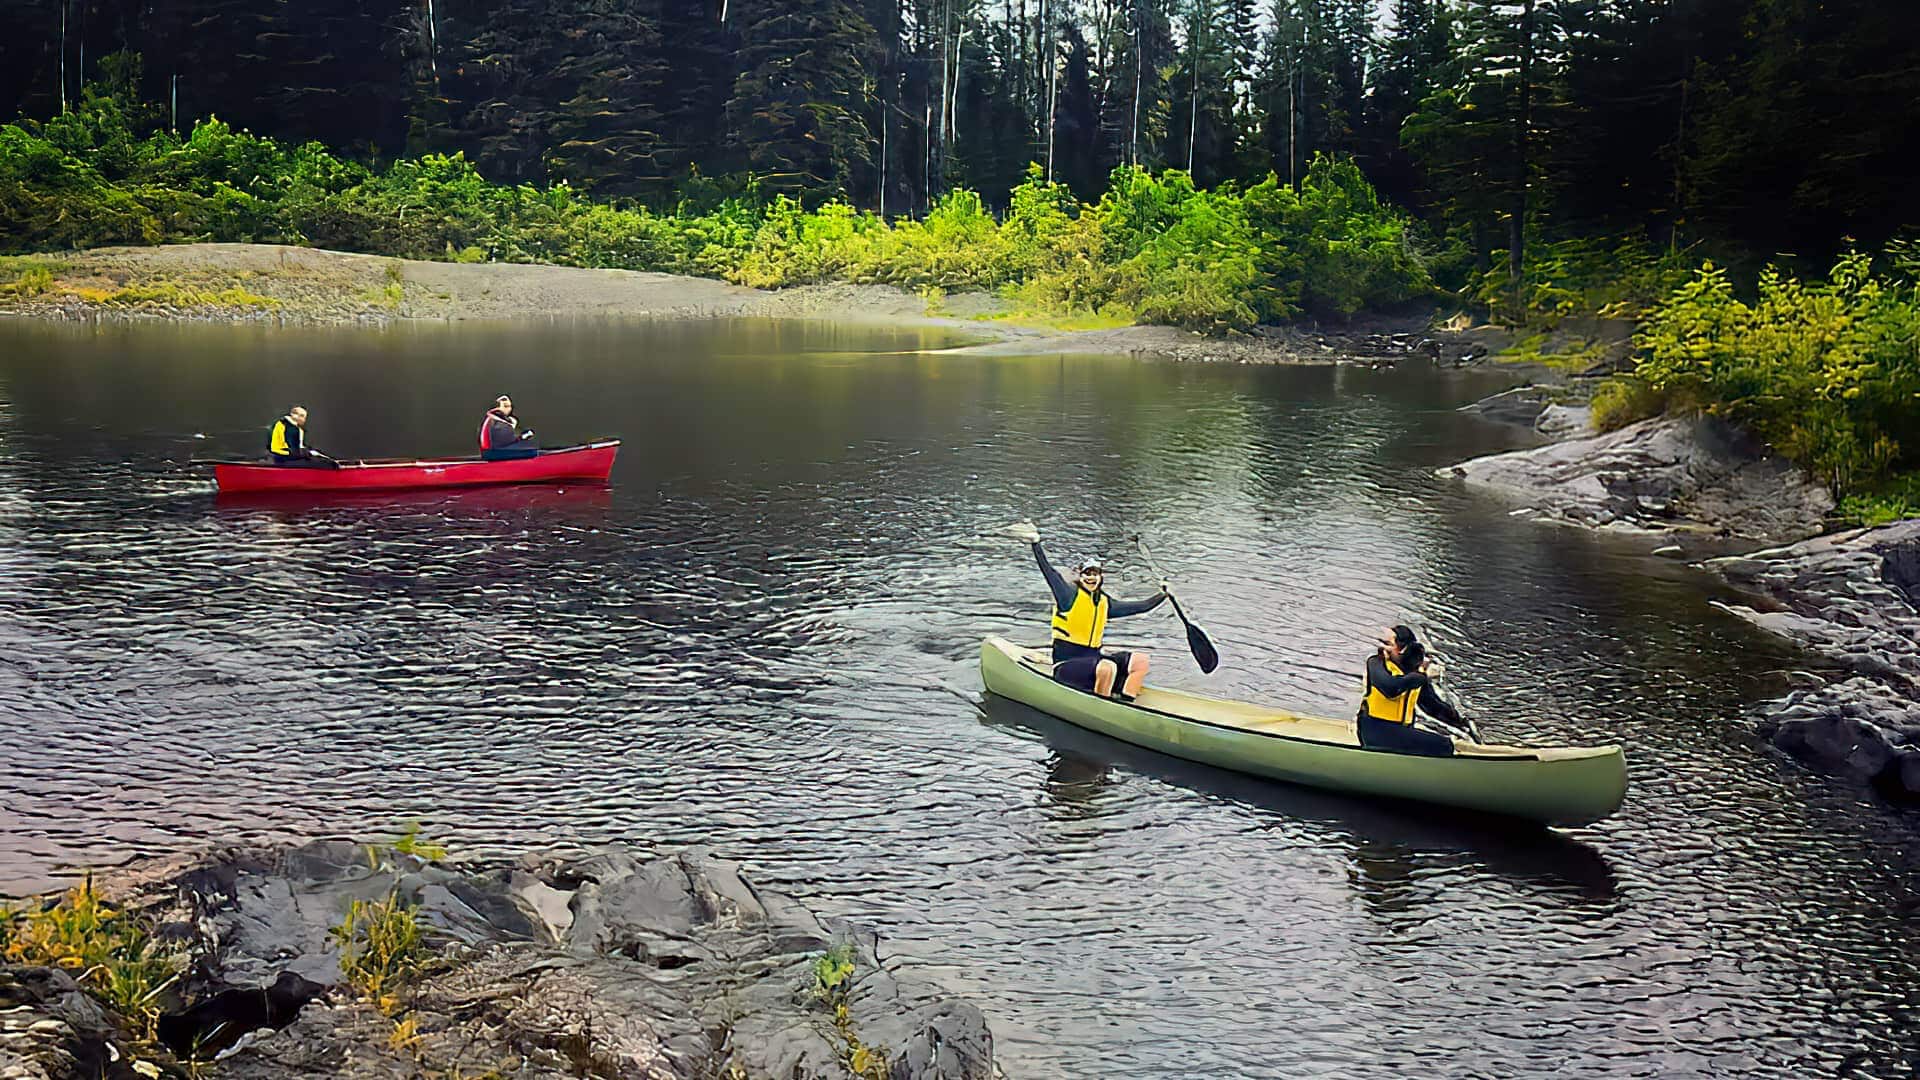 UMFK students canoeing on the river in two canoes. one student waves to the camera